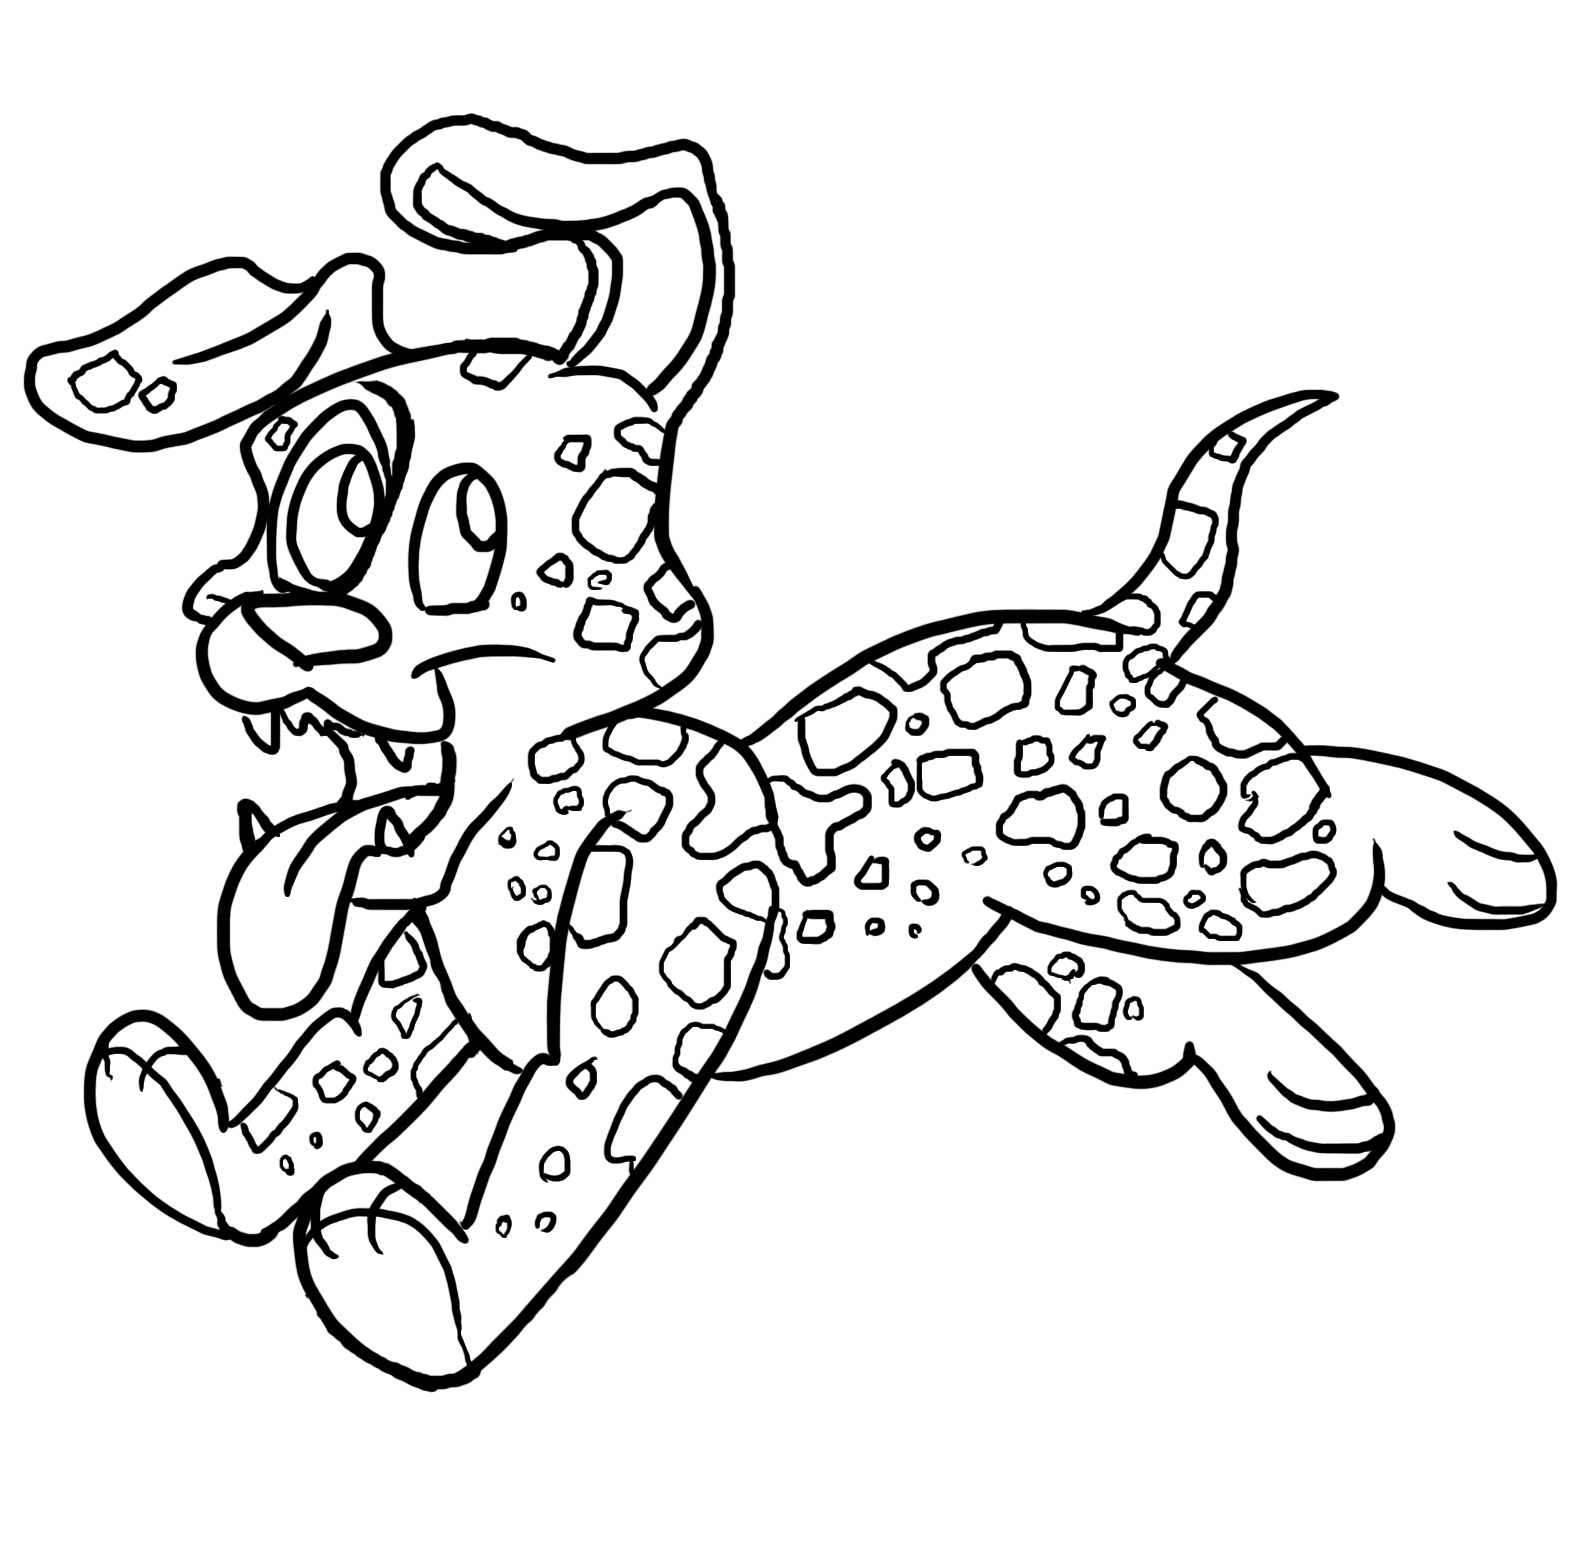 Leopard Dog Coloring Pages